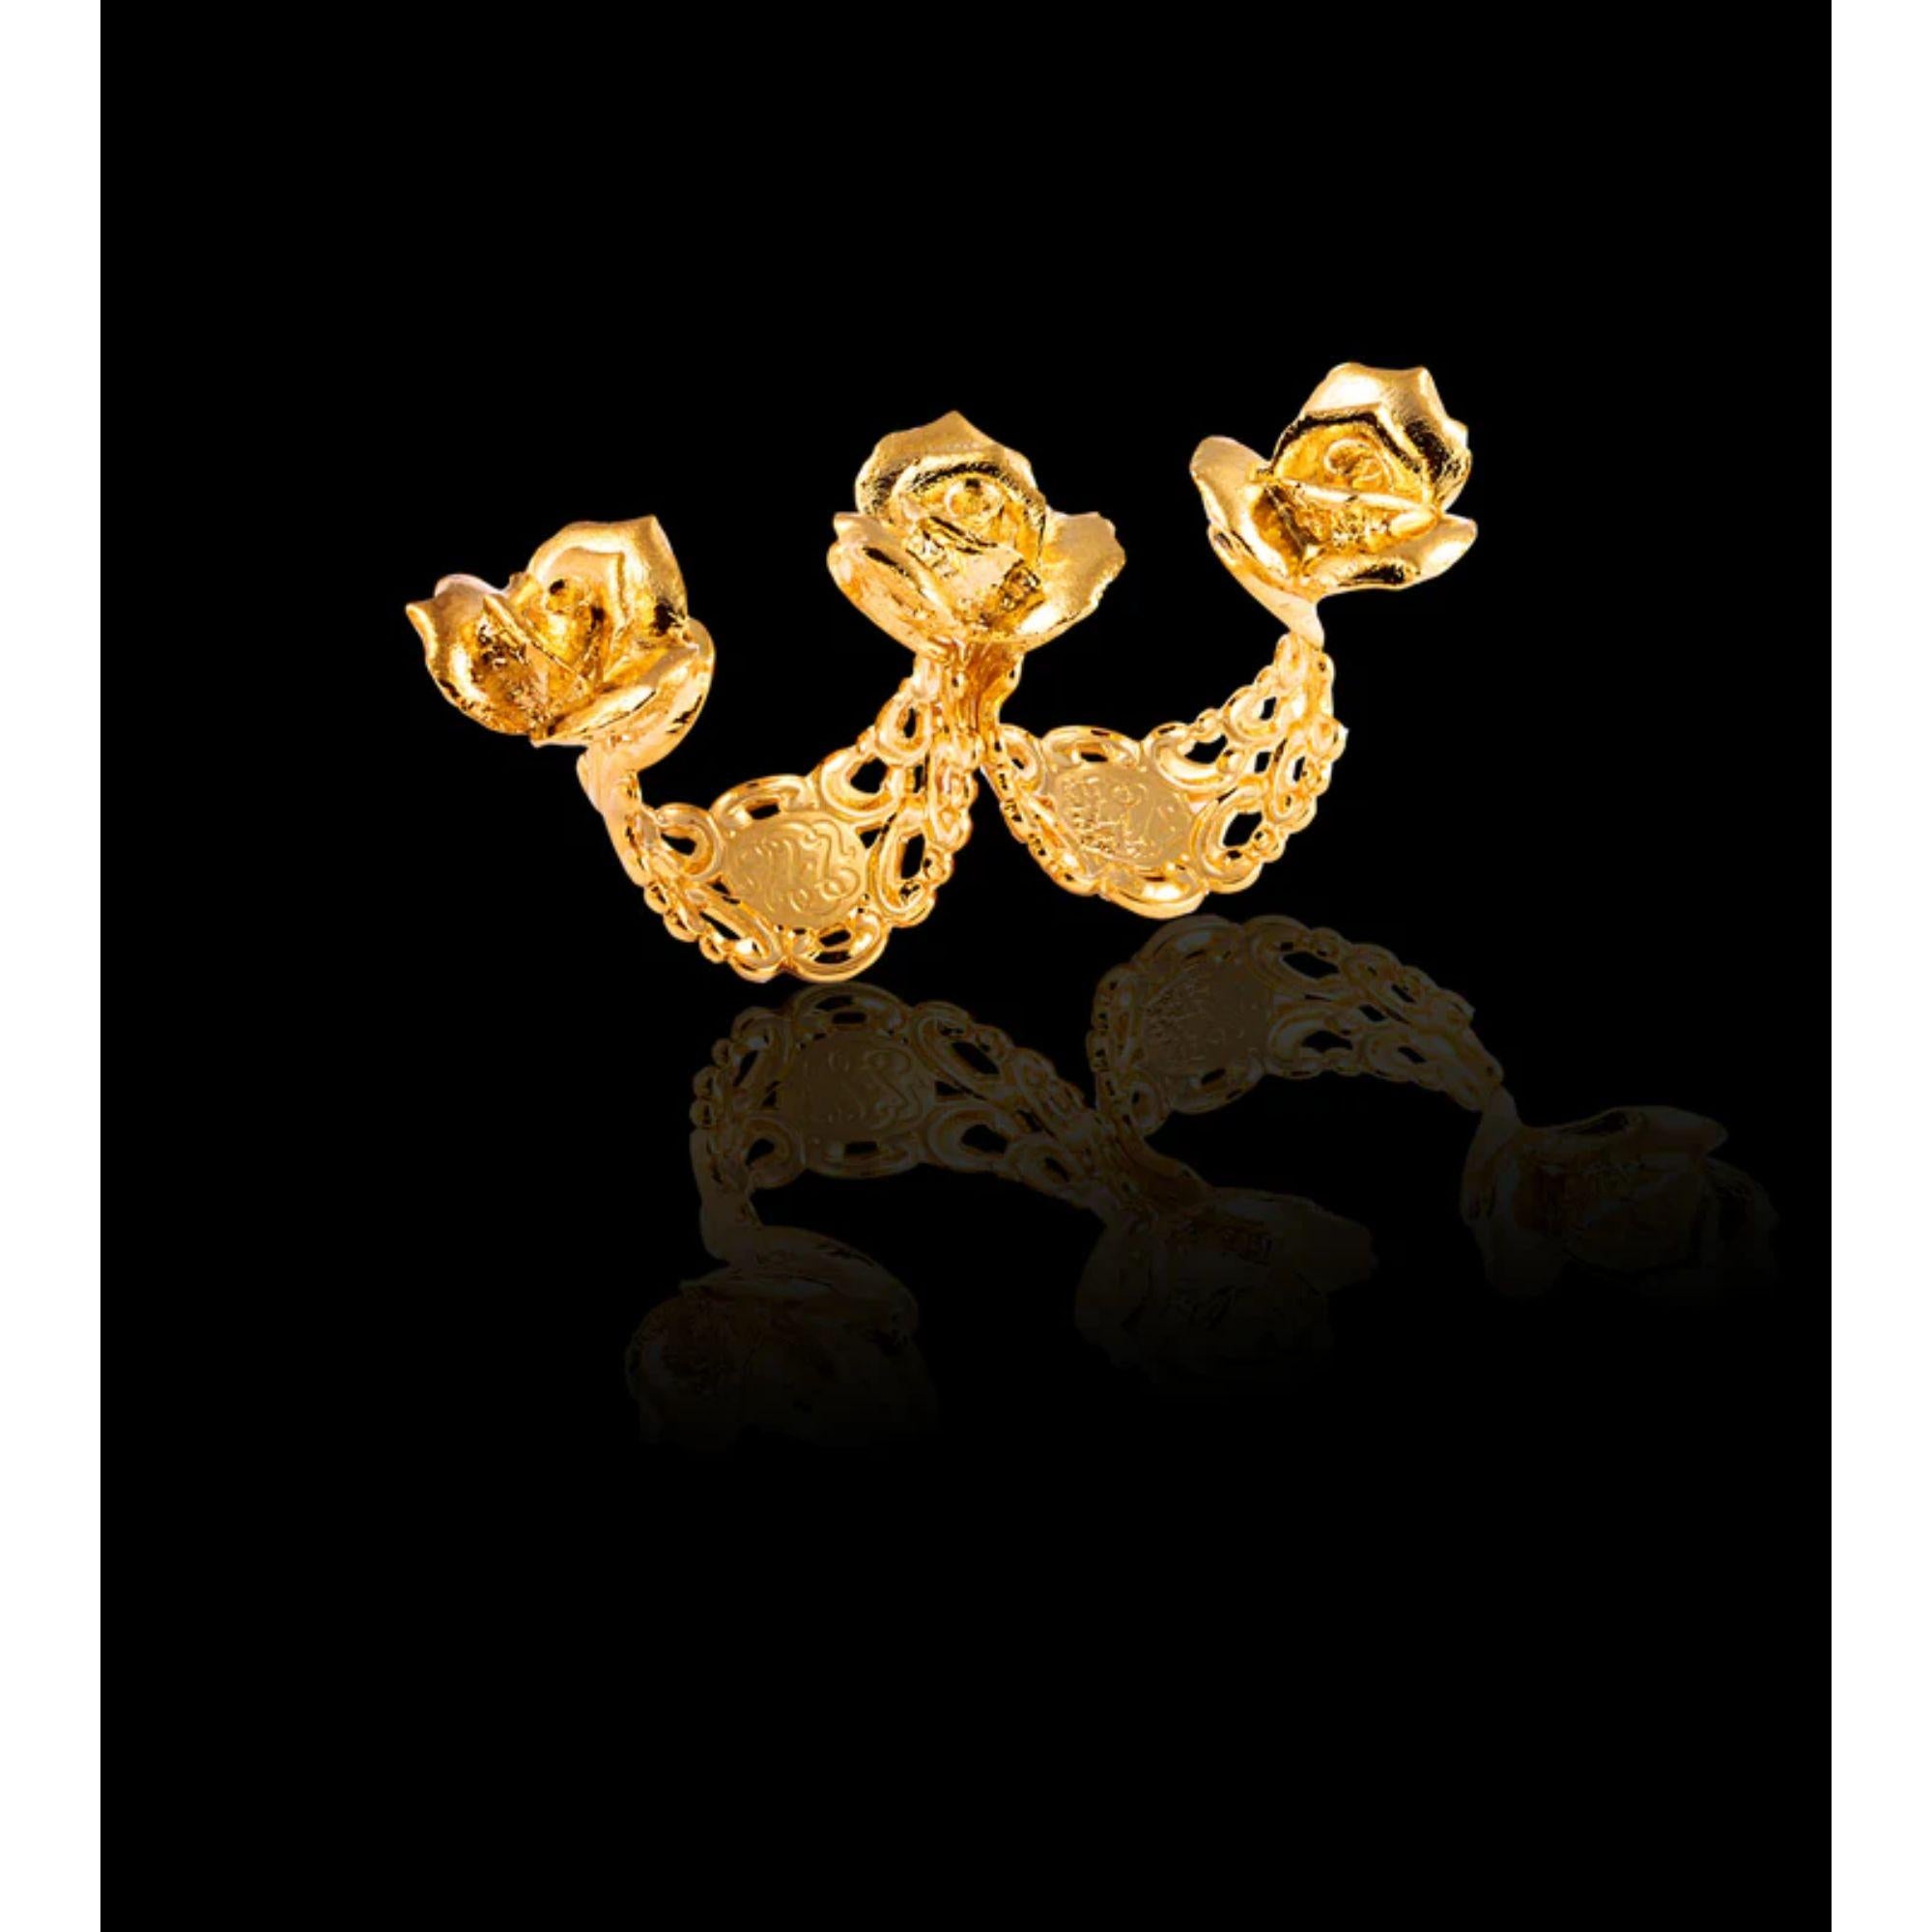 Sitting perfectly between the grooves of your fingers, the triple rosettes ring is the definition of delicate hand adornment. A luxurious double-knuckle ring handmade to fit just perfectly. Goes great with the matching tri-rosette earrings. Made in